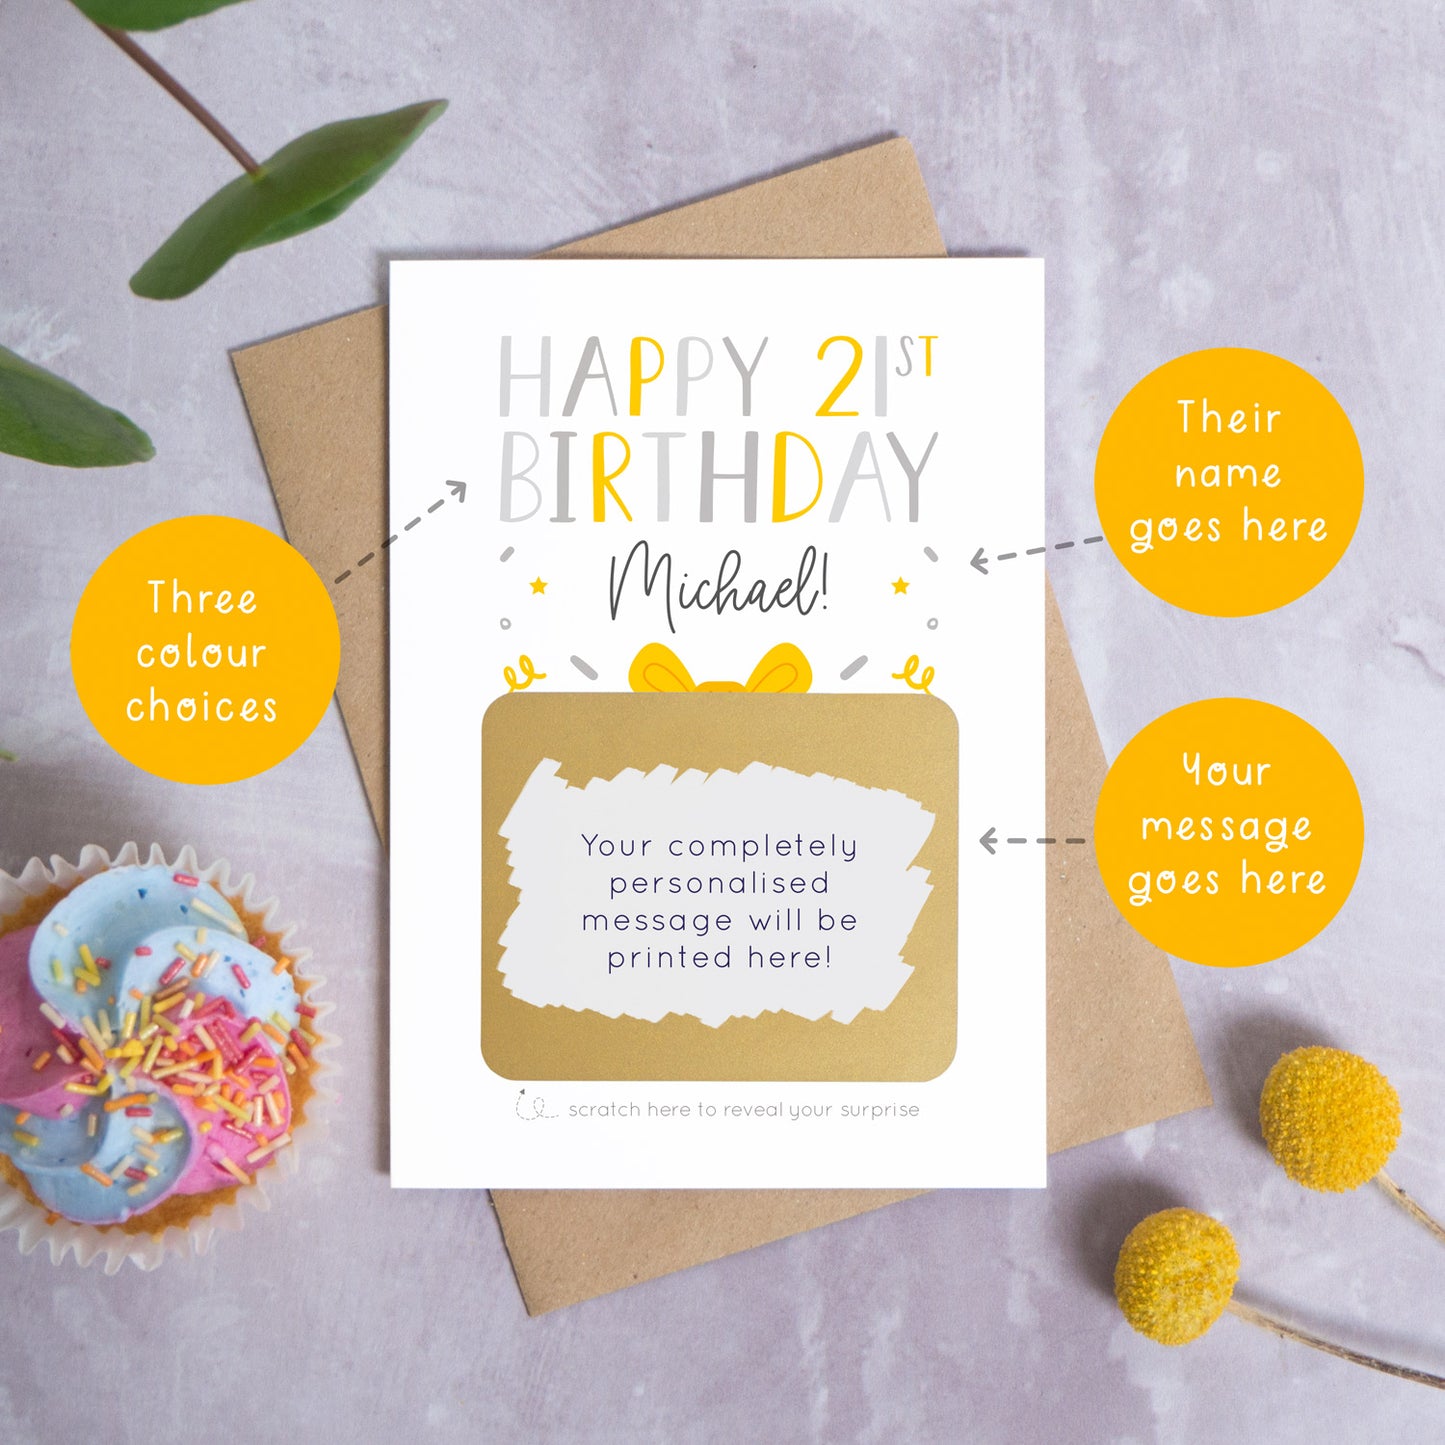 A personalised happy 21st birthday scratch card in grey that has been photographed on a grey background with foliage and a cupcake. There are also orange circles laid over the top of this image with arrows pointing to the areas that can be customised. In this instance they point to the name, the colour choices and the personalised scratch off message.